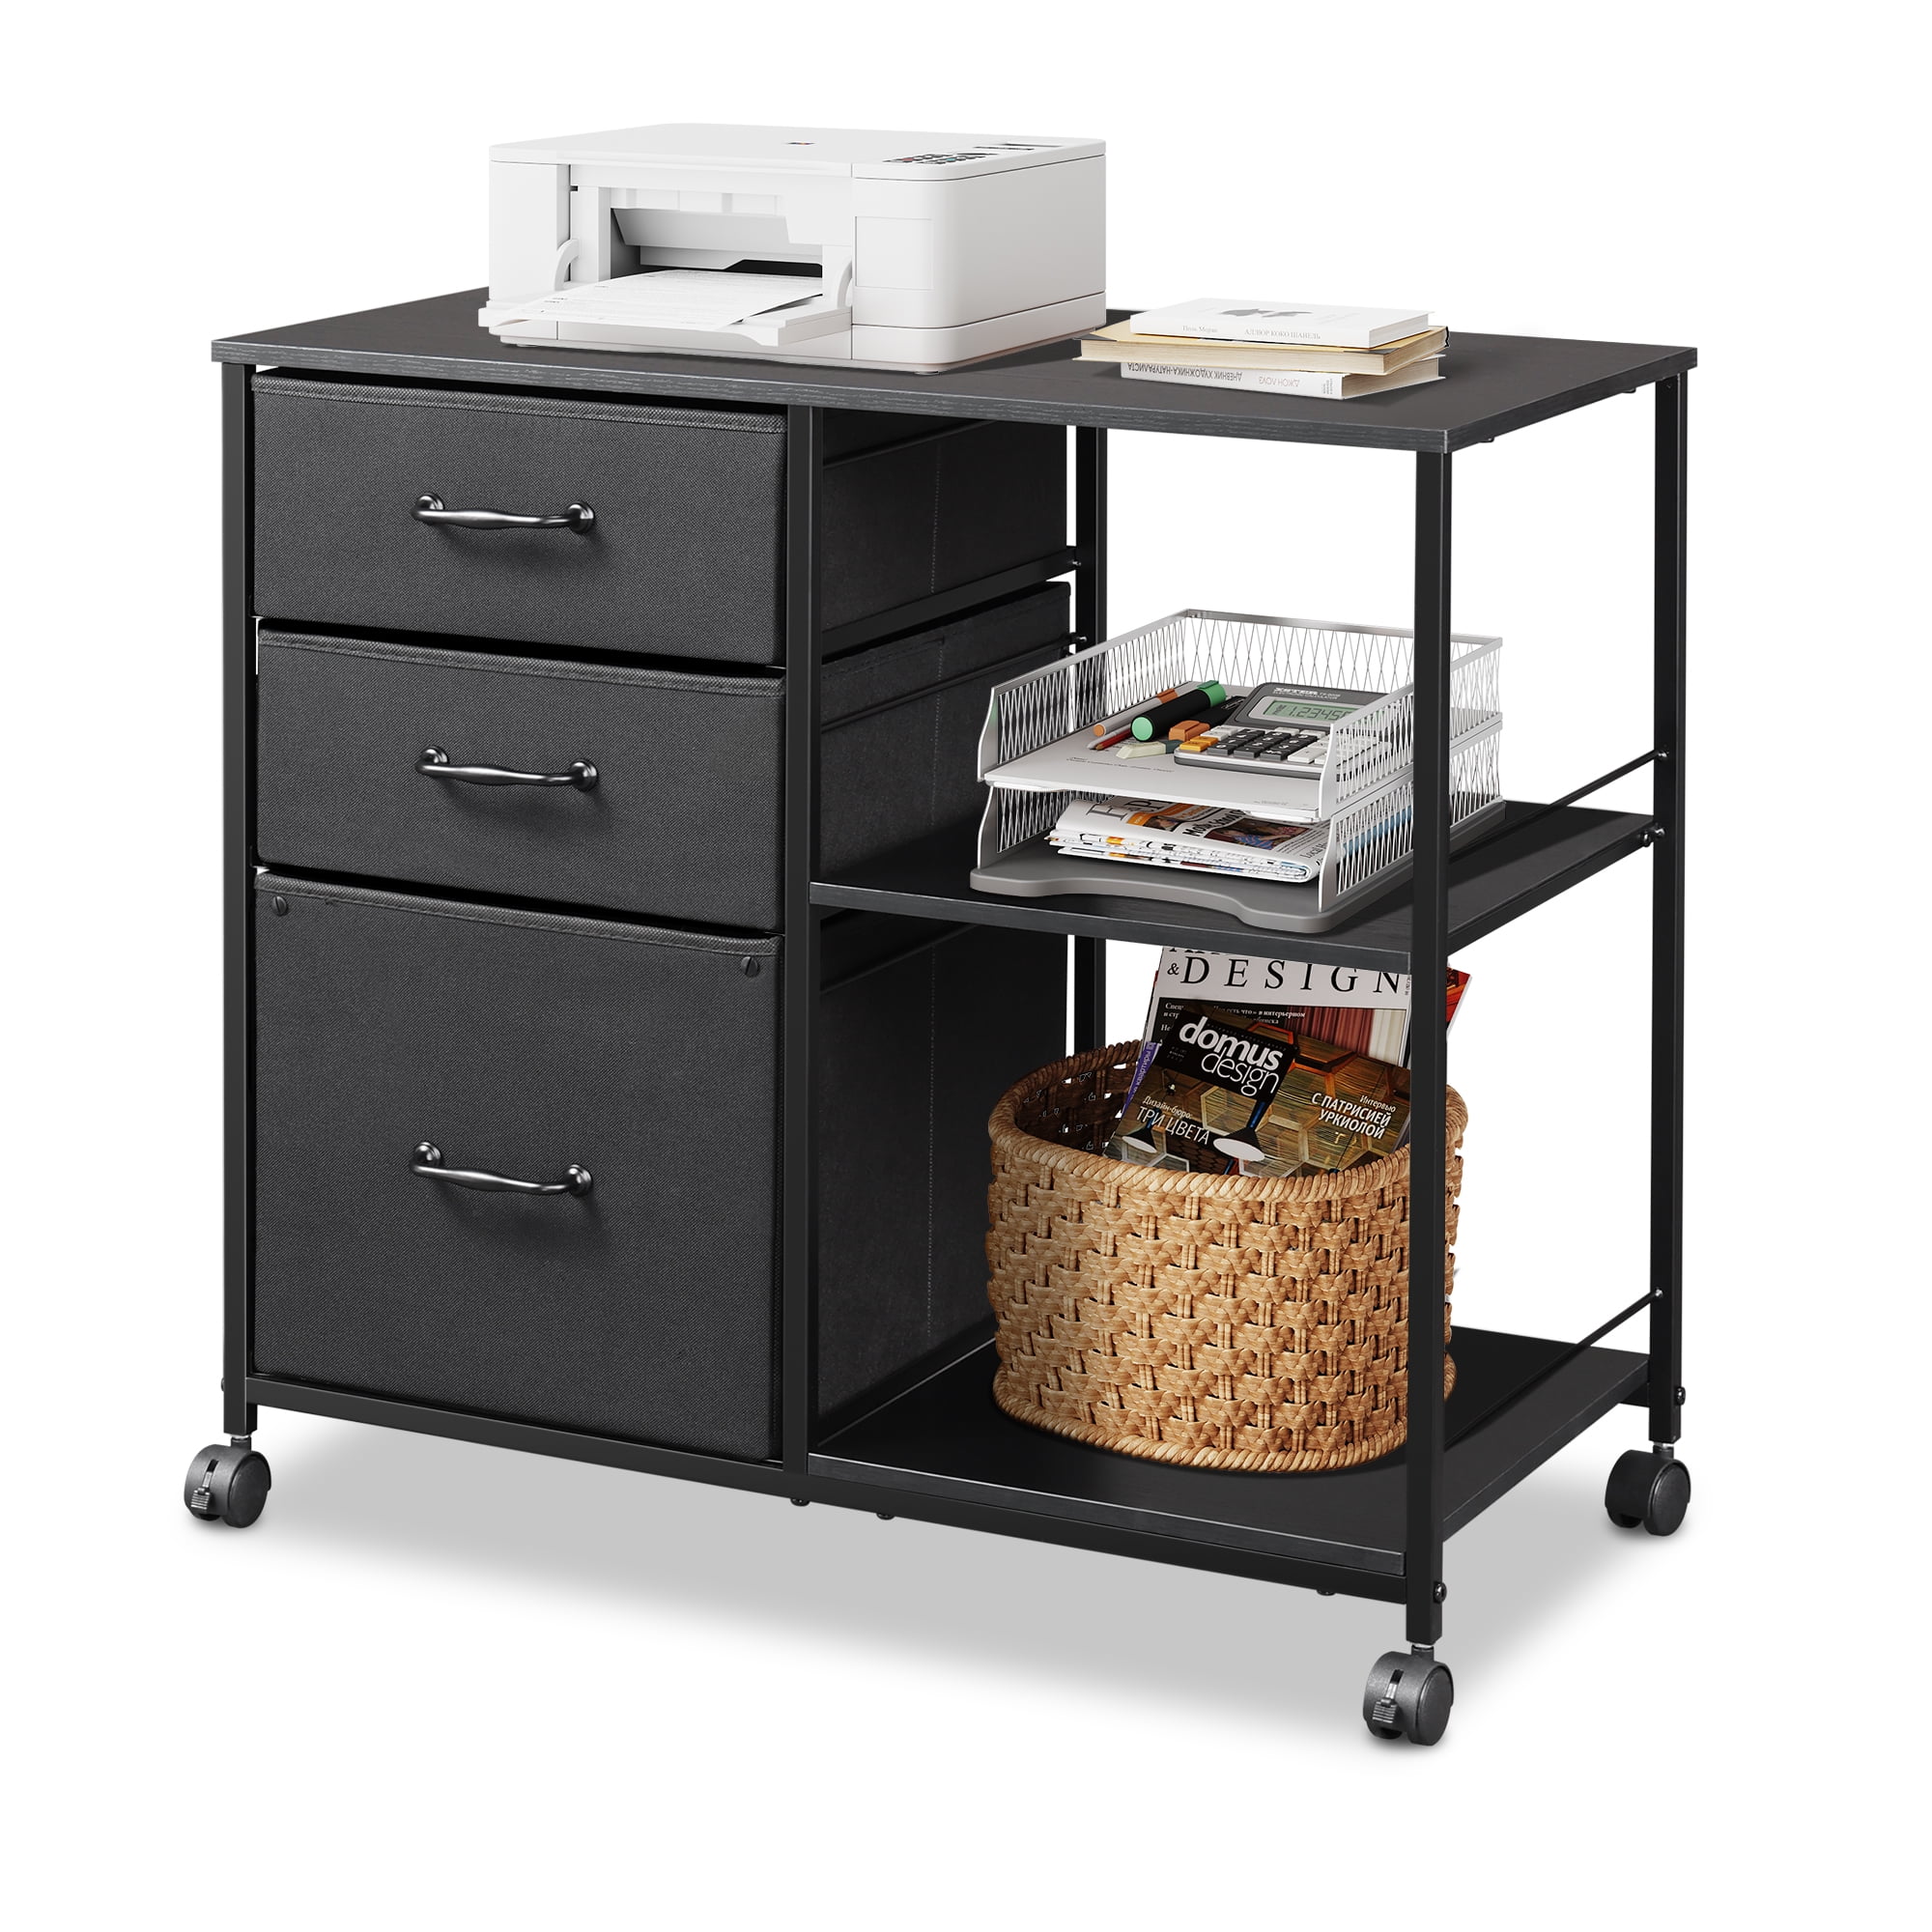 QDSSDECO 3-Drawer Wood File Cabinet Mobile Lateral Filing Cabinet Suitable for A4 Paper Black for Home Office with Rolling Wheel Printer Stand and Open Adjustable Storage Shelves 